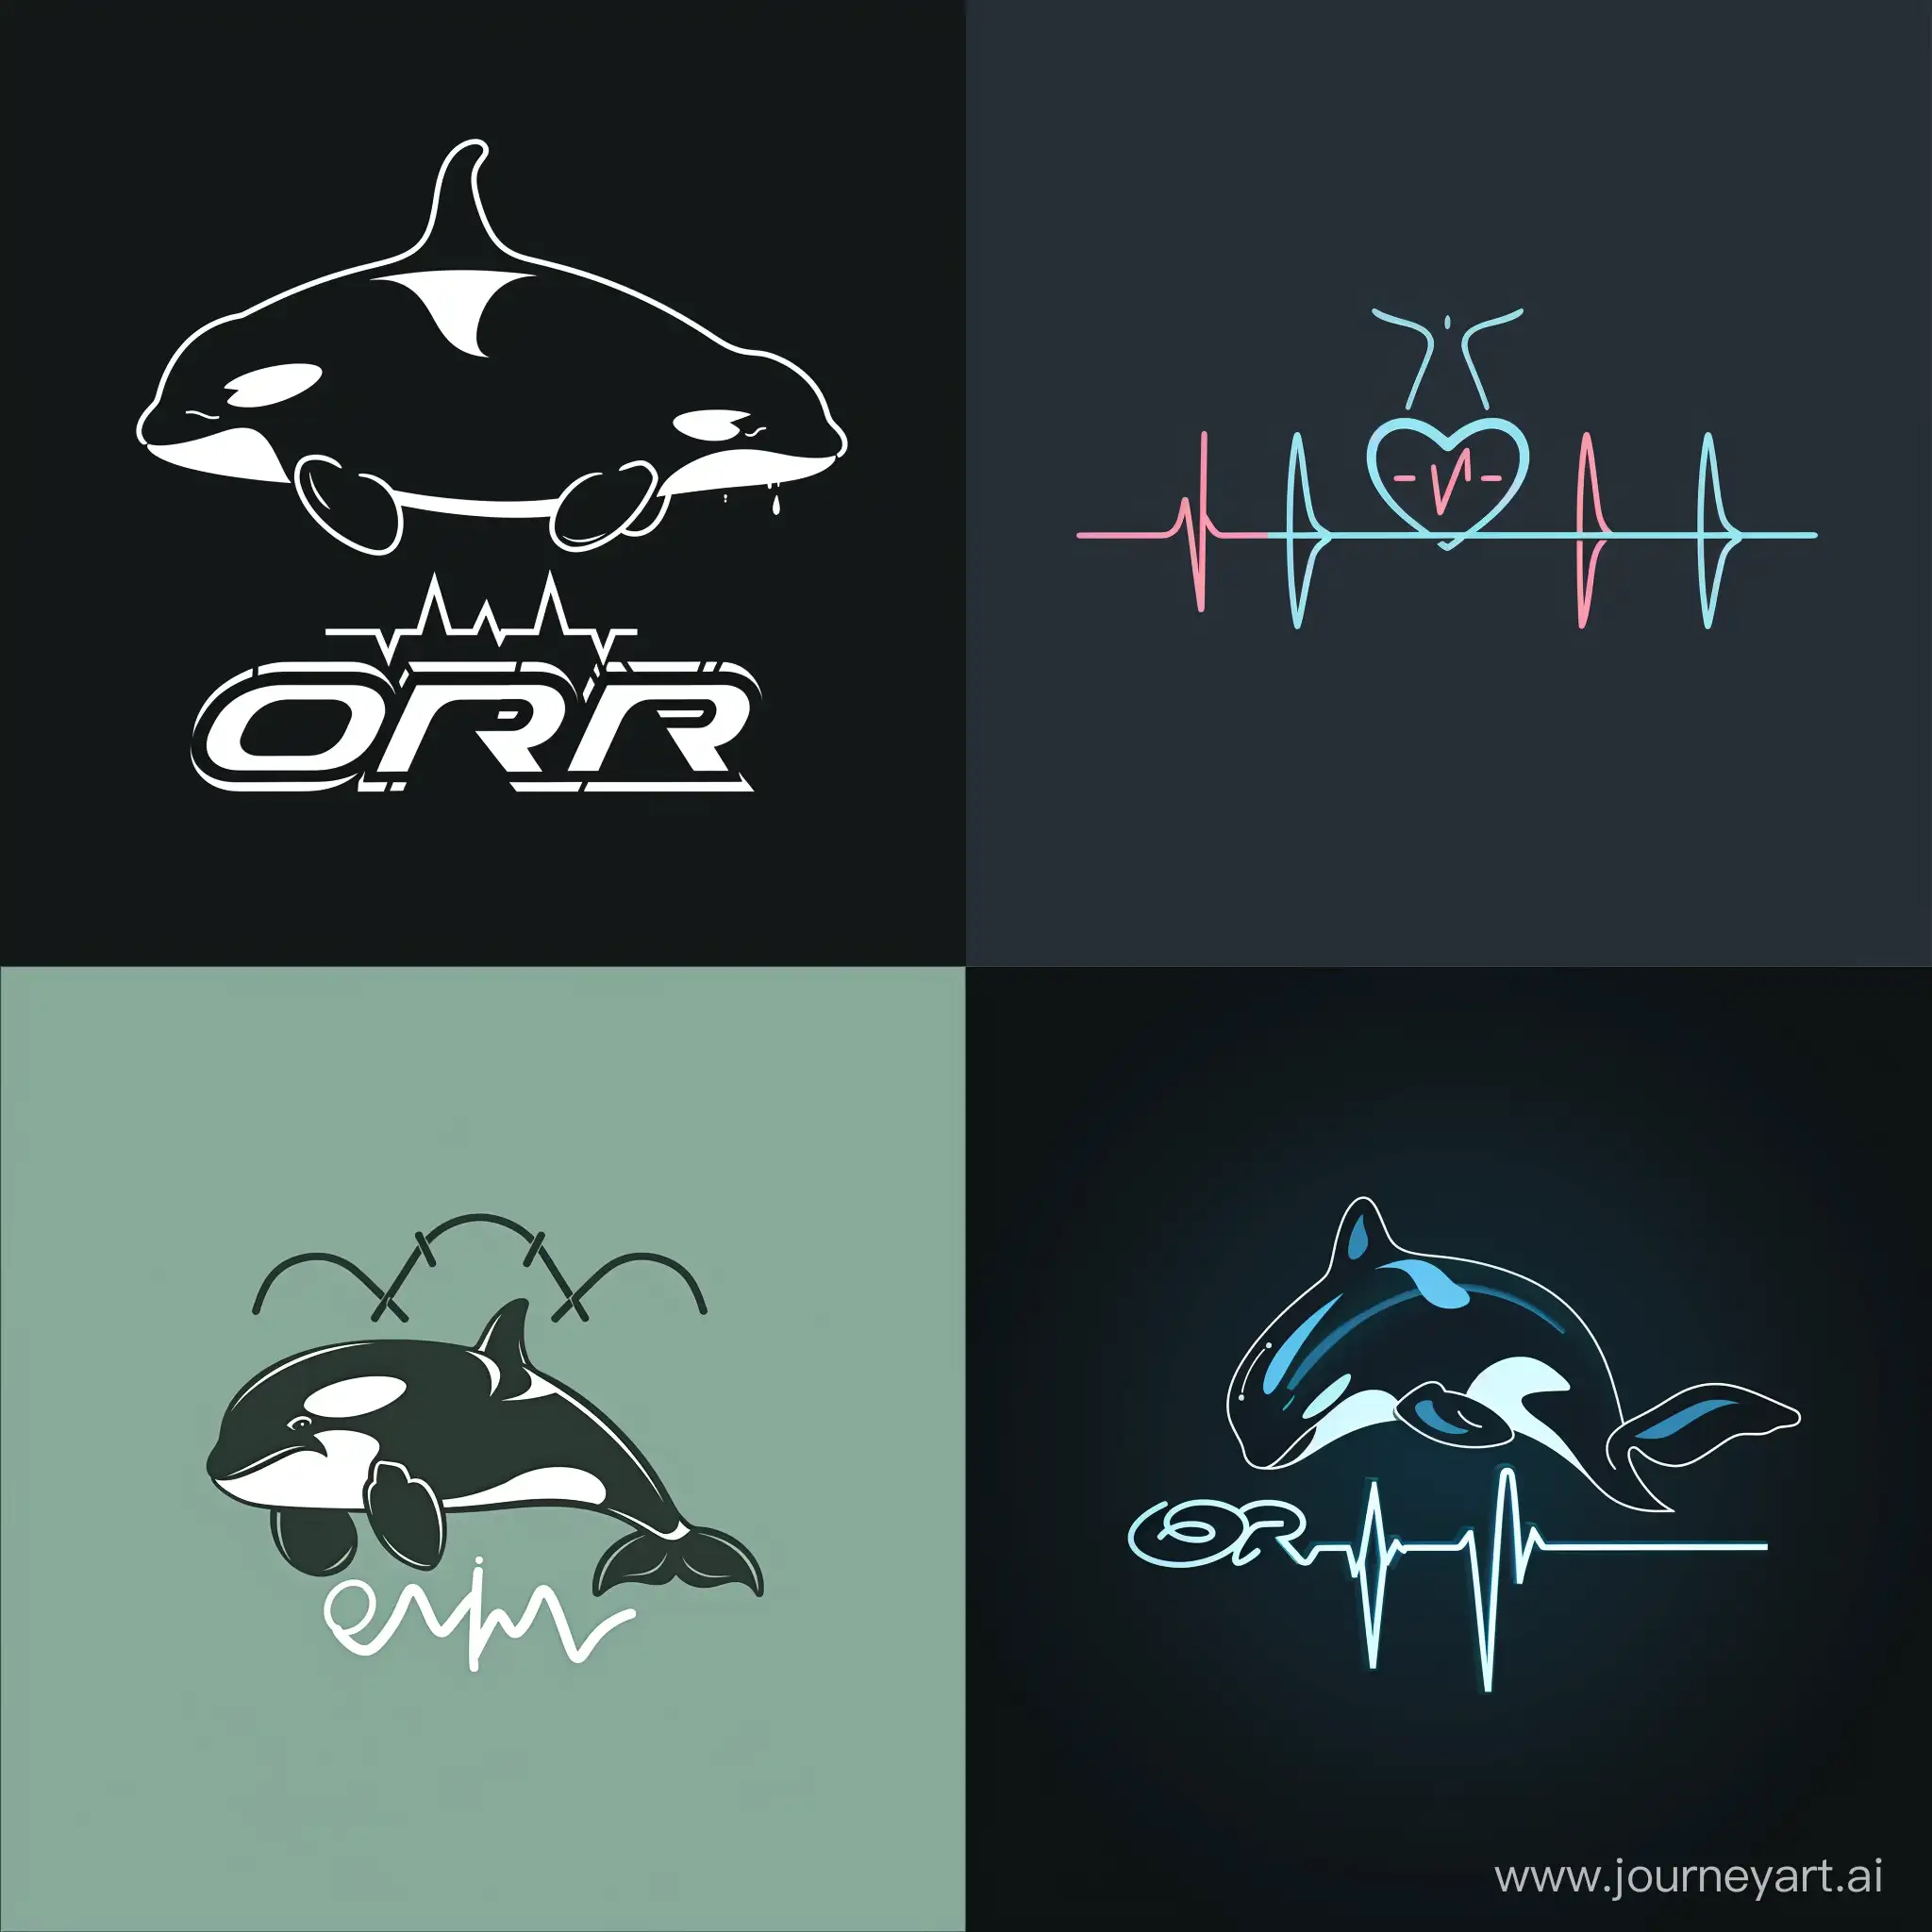 You can create a logo with the name of orca in the case of a medical equipment company, a heartbeat or a positive sign can be used in the logo